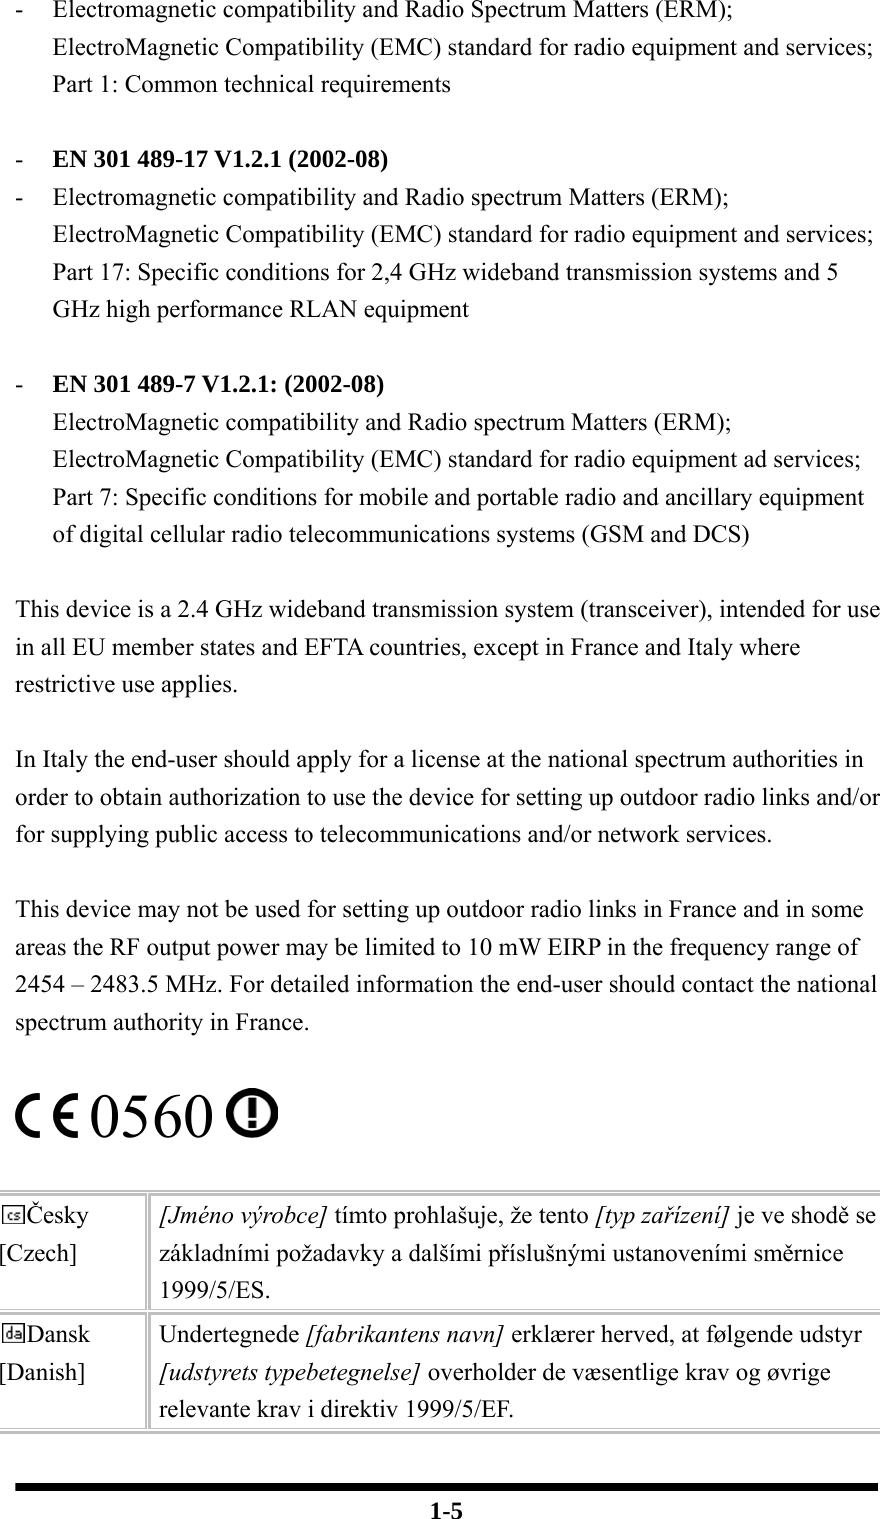  1-5 - Electromagnetic compatibility and Radio Spectrum Matters (ERM); ElectroMagnetic Compatibility (EMC) standard for radio equipment and services; Part 1: Common technical requirements  - EN 301 489-17 V1.2.1 (2002-08)   - Electromagnetic compatibility and Radio spectrum Matters (ERM); ElectroMagnetic Compatibility (EMC) standard for radio equipment and services; Part 17: Specific conditions for 2,4 GHz wideband transmission systems and 5 GHz high performance RLAN equipment  - EN 301 489-7 V1.2.1: (2002-08) ElectroMagnetic compatibility and Radio spectrum Matters (ERM); ElectroMagnetic Compatibility (EMC) standard for radio equipment ad services; Part 7: Specific conditions for mobile and portable radio and ancillary equipment of digital cellular radio telecommunications systems (GSM and DCS)  This device is a 2.4 GHz wideband transmission system (transceiver), intended for use in all EU member states and EFTA countries, except in France and Italy where restrictive use applies.  In Italy the end-user should apply for a license at the national spectrum authorities in order to obtain authorization to use the device for setting up outdoor radio links and/or for supplying public access to telecommunications and/or network services.  This device may not be used for setting up outdoor radio links in France and in some areas the RF output power may be limited to 10 mW EIRP in the frequency range of 2454 – 2483.5 MHz. For detailed information the end-user should contact the national spectrum authority in France.   0560    Česky [Czech] [Jméno výrobce] tímto prohlašuje, že tento [typ zařízení] je ve shodě se základními požadavky a dalšími příslušnými ustanoveními směrnice 1999/5/ES. Dansk [Danish] Undertegnede [fabrikantens navn] erklærer herved, at følgende udstyr [udstyrets typebetegnelse] overholder de væsentlige krav og øvrige relevante krav i direktiv 1999/5/EF. 